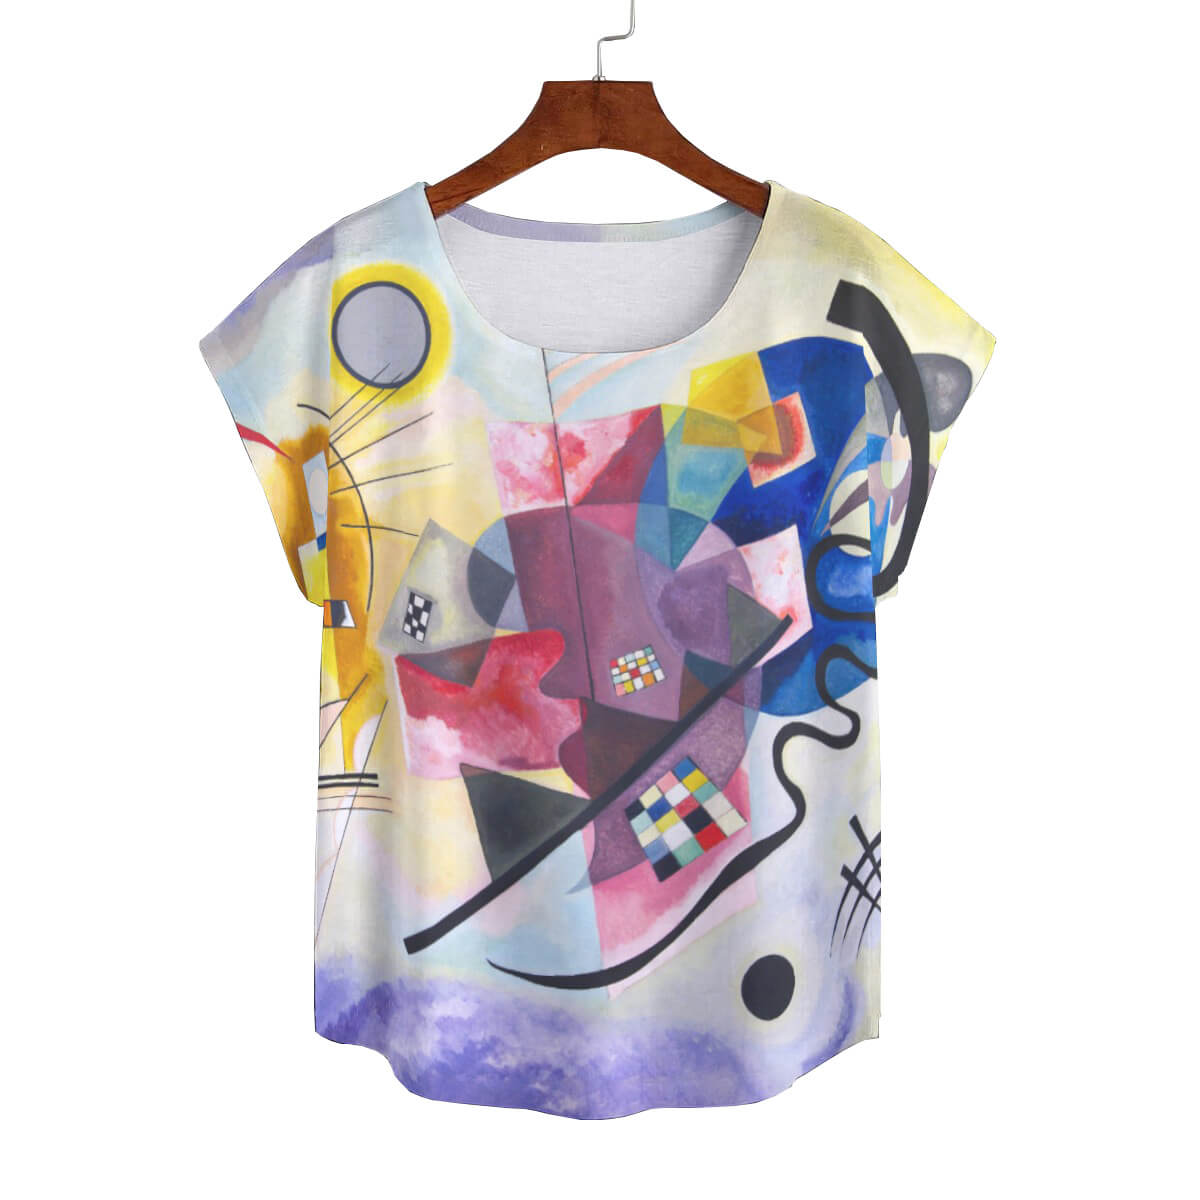 Vibrant abstract art tee for women